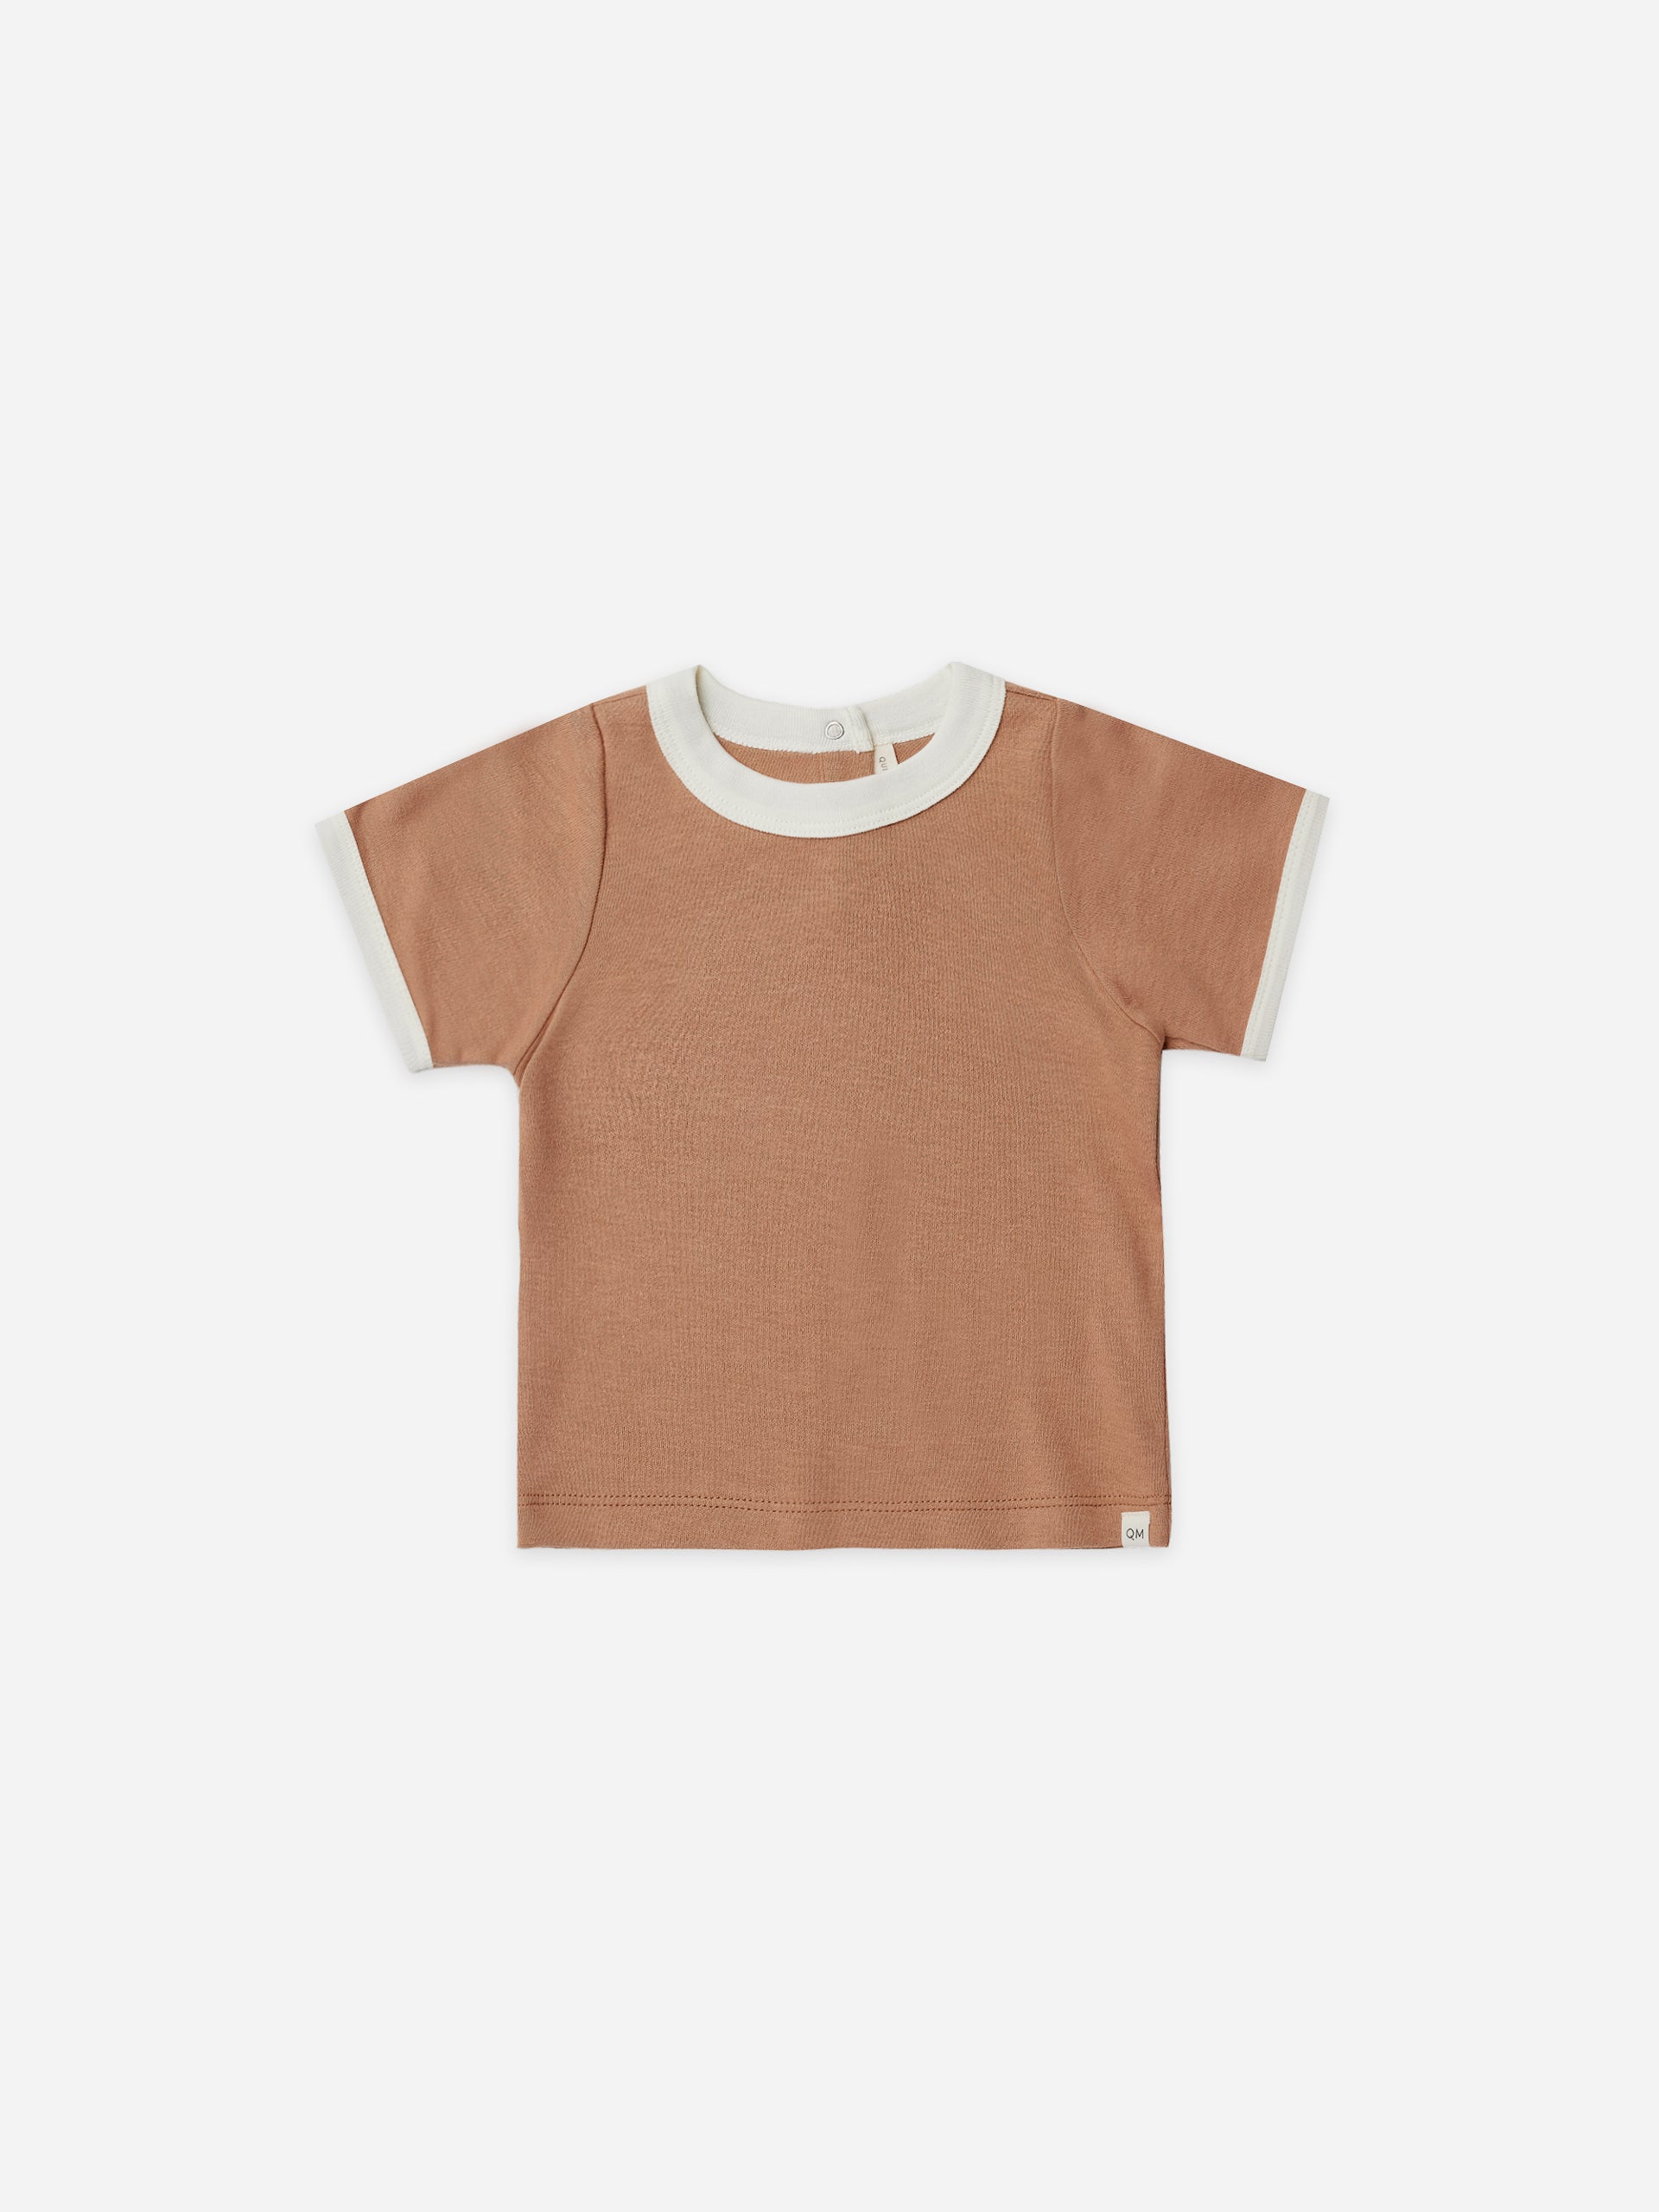 ringer tee | clay - Quincy Mae | Baby Basics | Baby Clothing | Organic Baby Clothes | Modern Baby Boy Clothes |